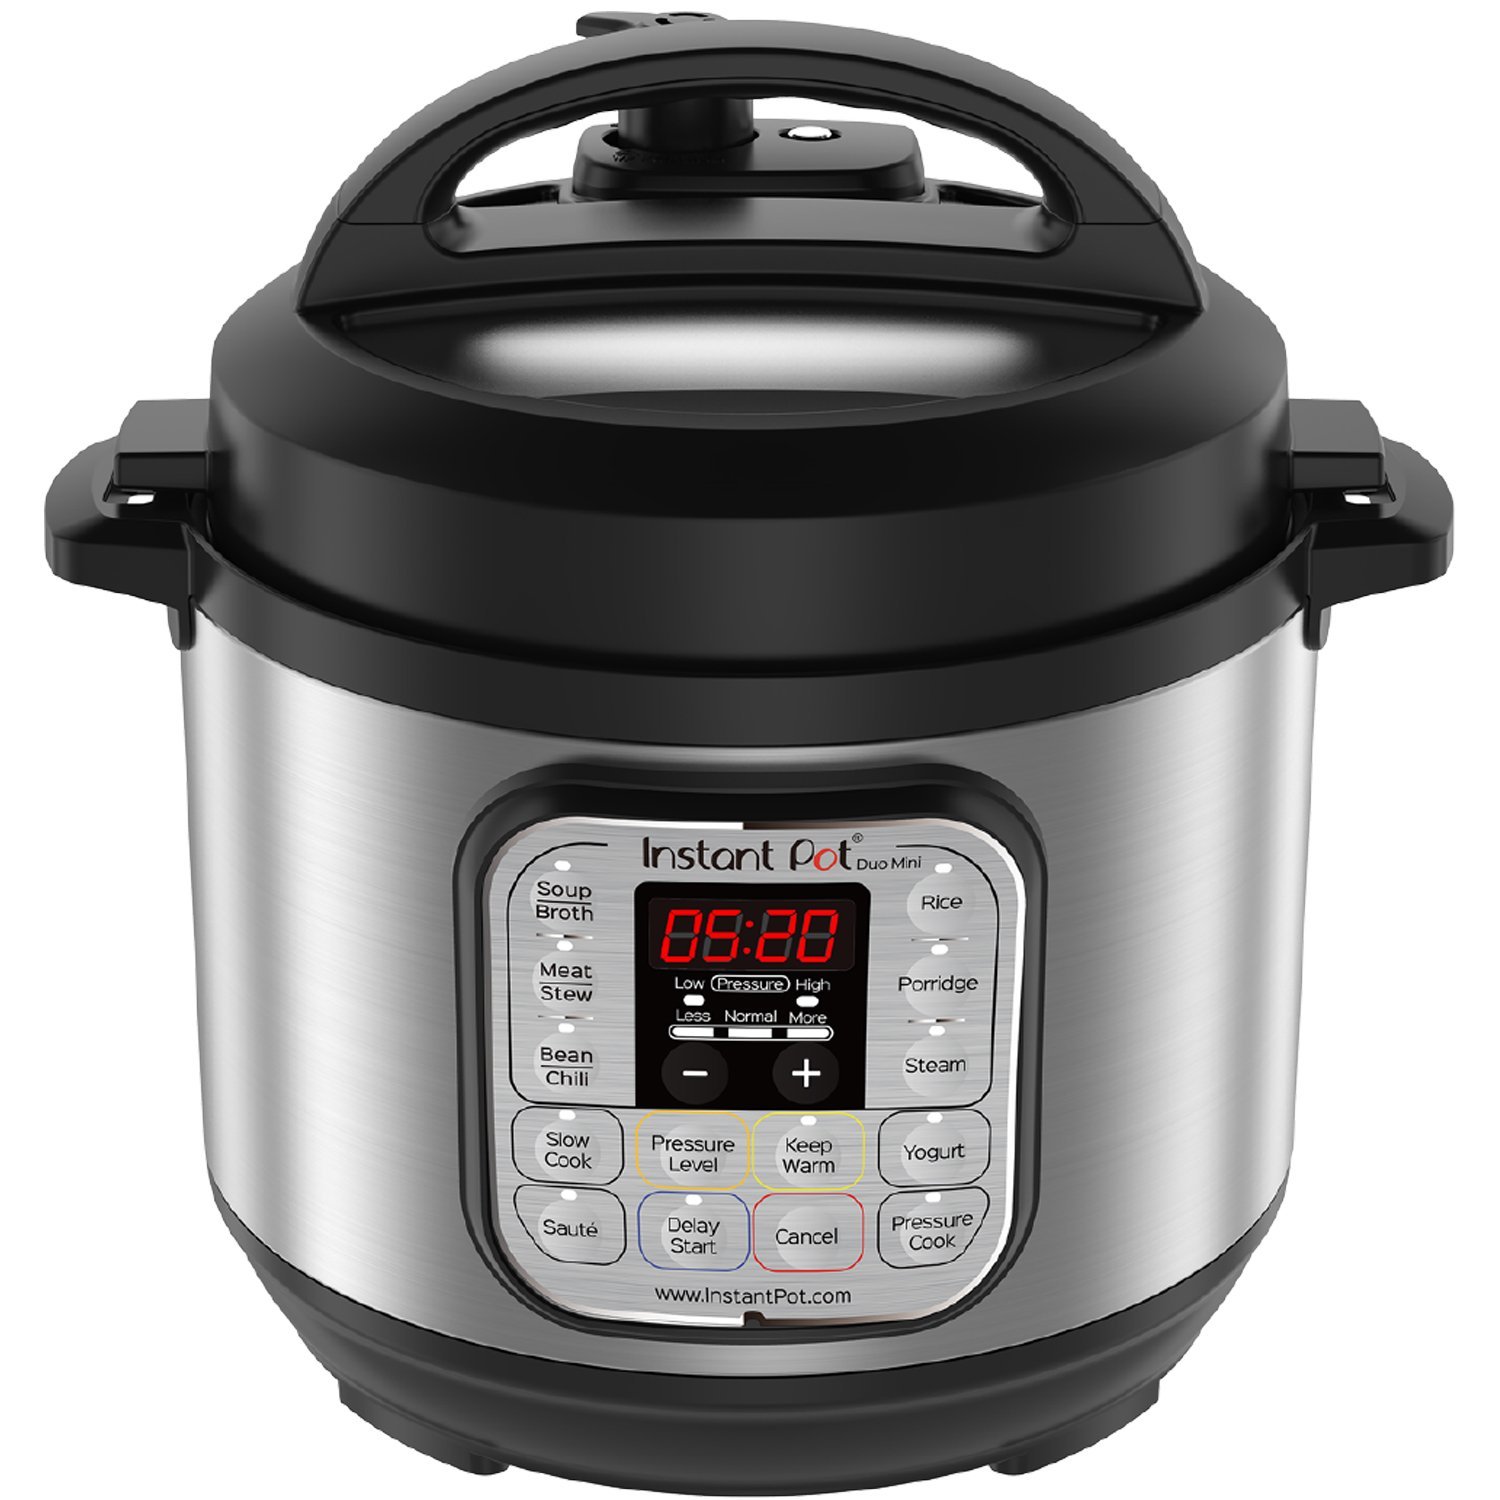 Today only: Instant Pot Duo Mini 3-quart 7-in-1 pressure cooker for $48